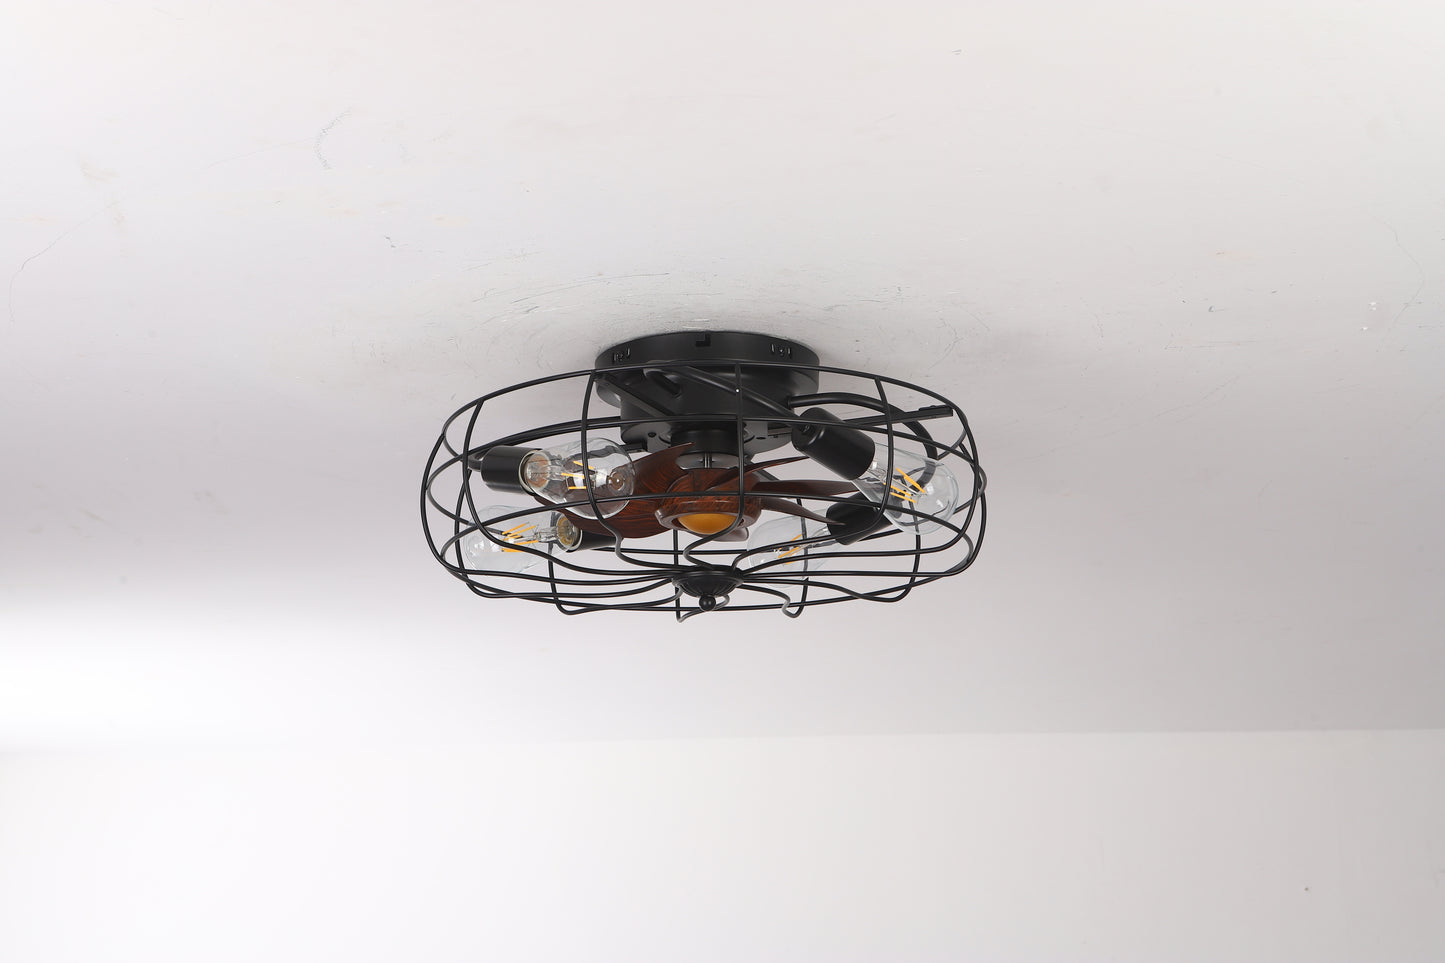 6-Speed Remote Controlled Ceiling Fan with Reversible Blades for Peaceful Operation and Stylish Design